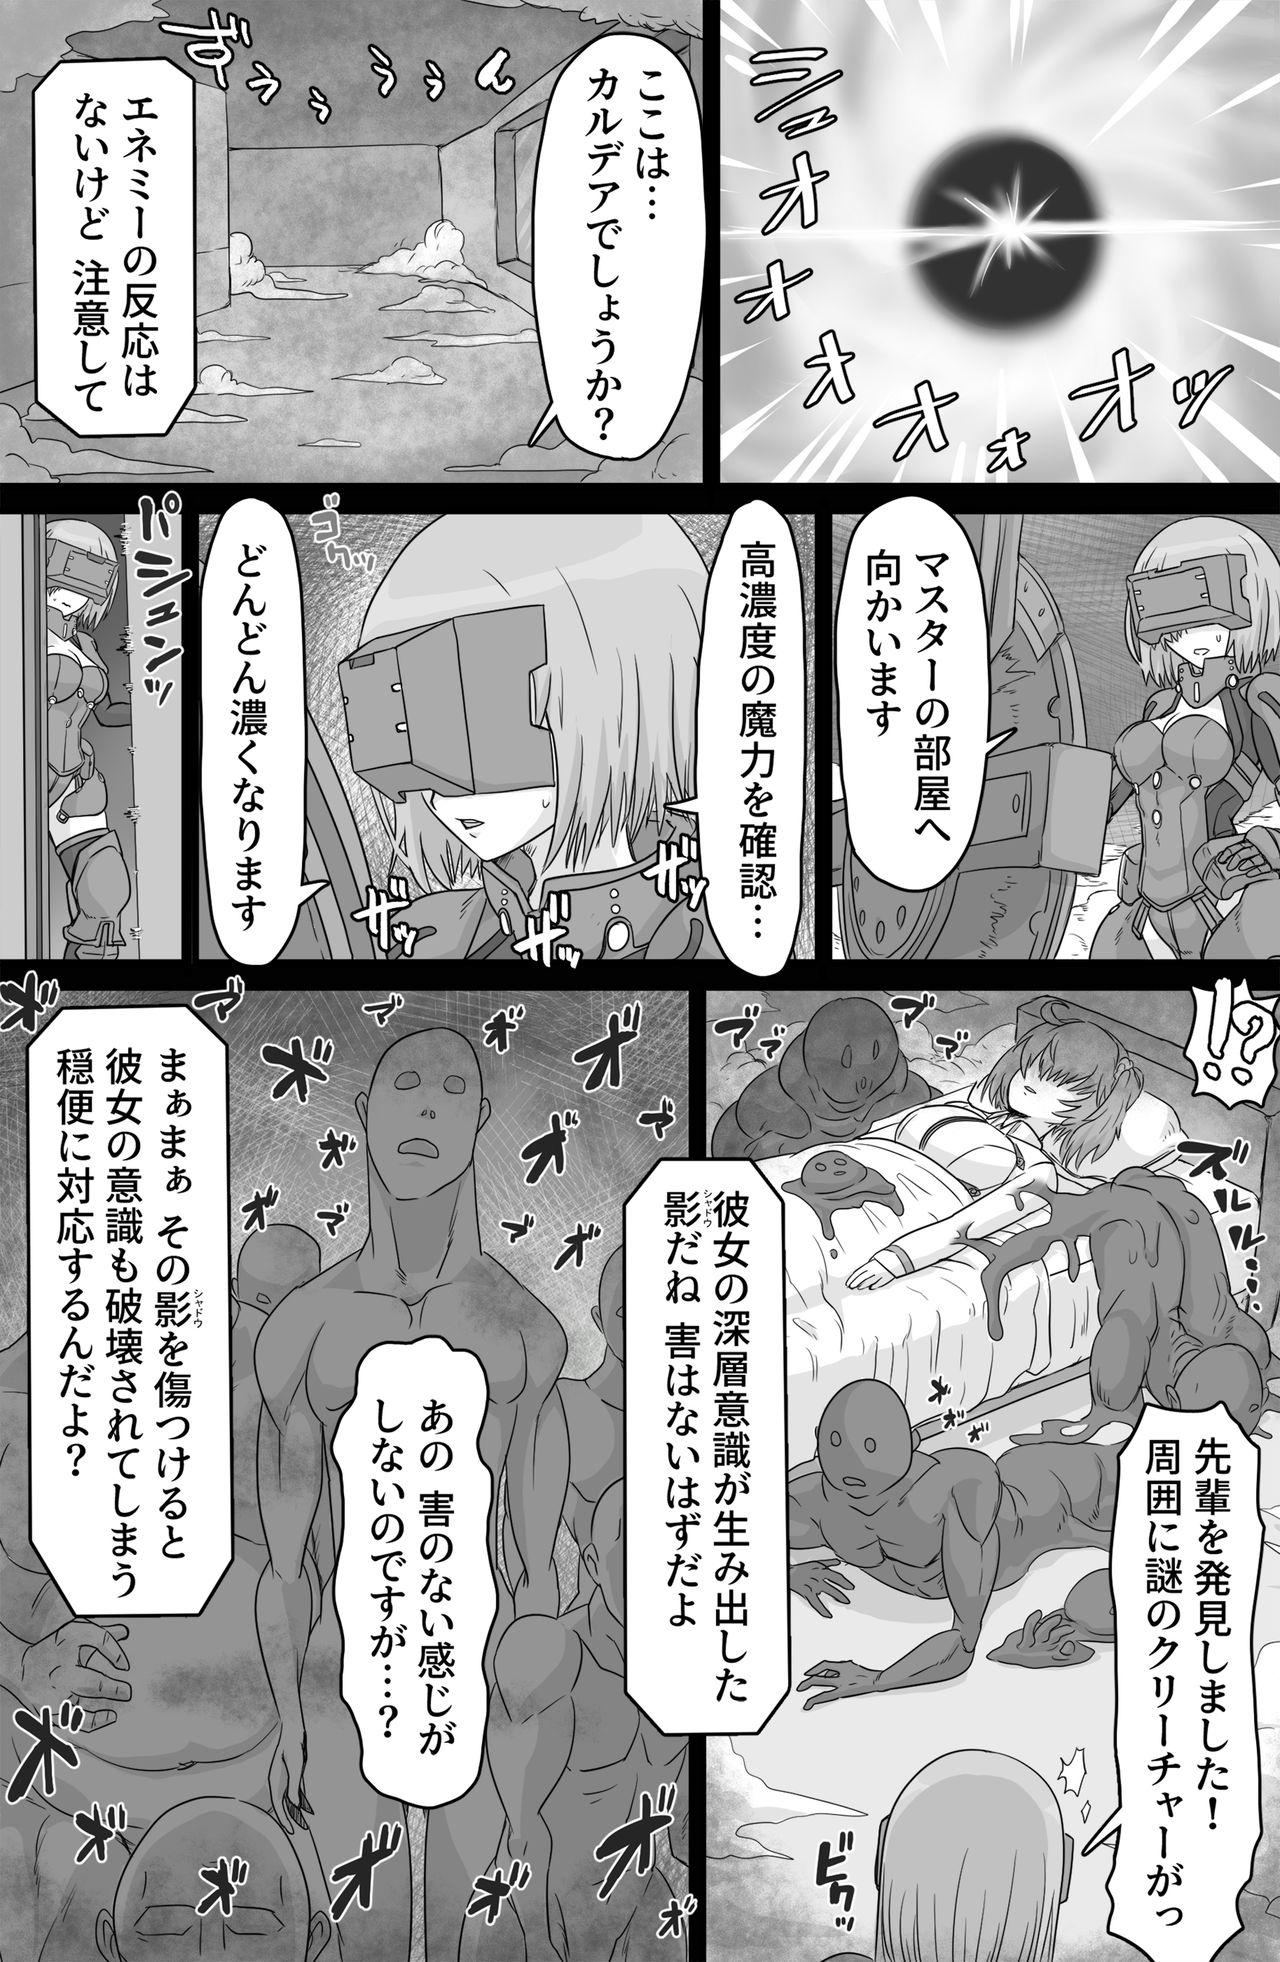 Guys Shadow Bind - Fate grand order Ftv Girls - Page 3